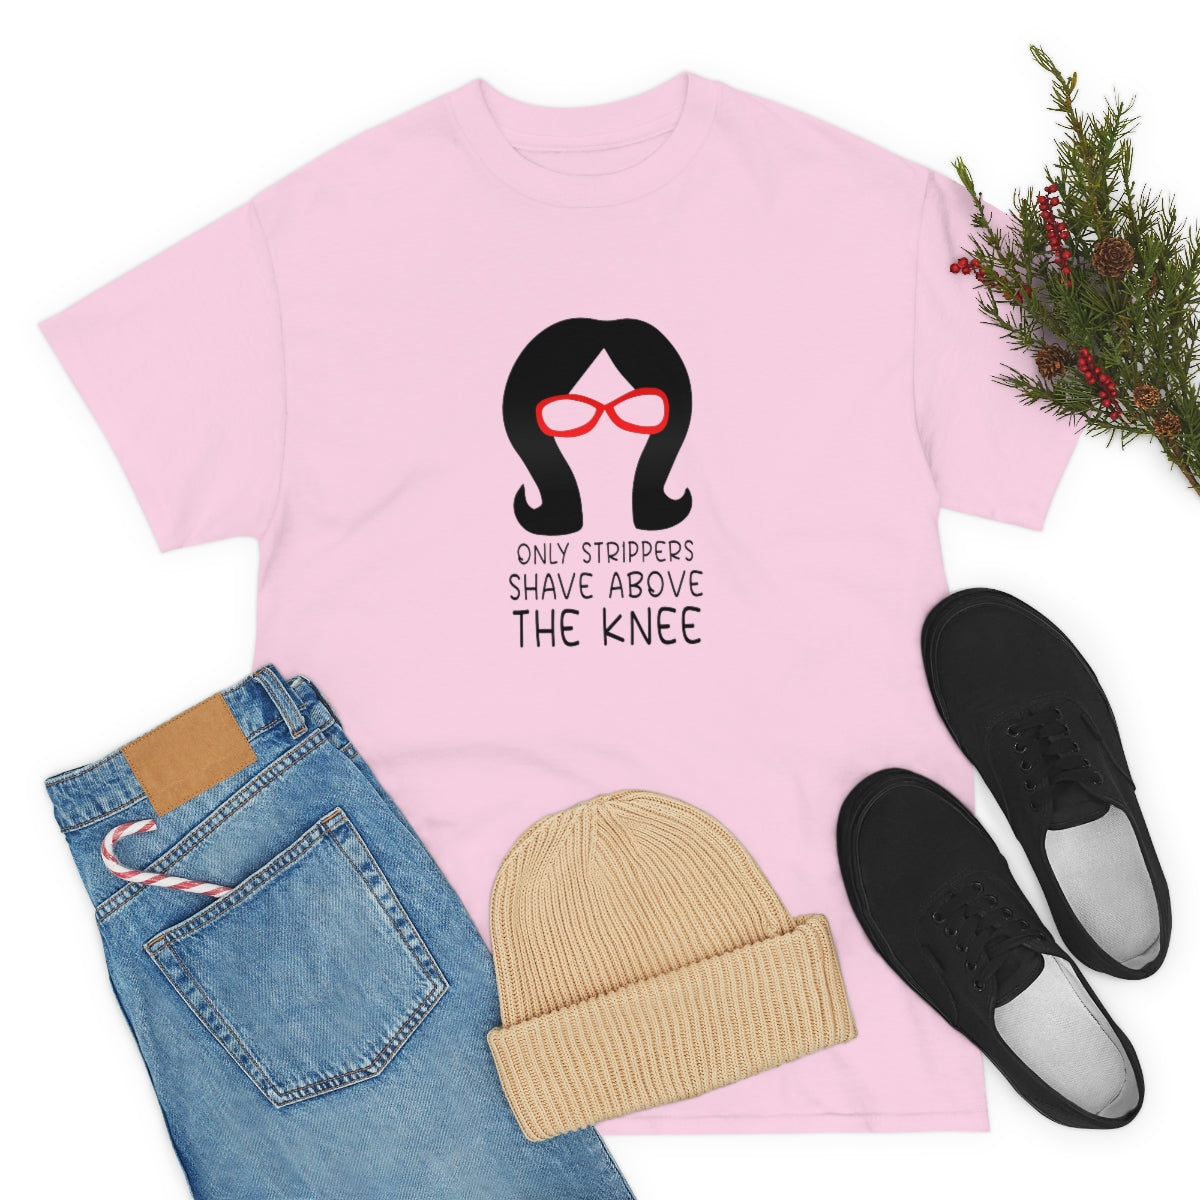 Only Strippers Unisex Cotton Tee - Just Like Bob Bob's Burgers